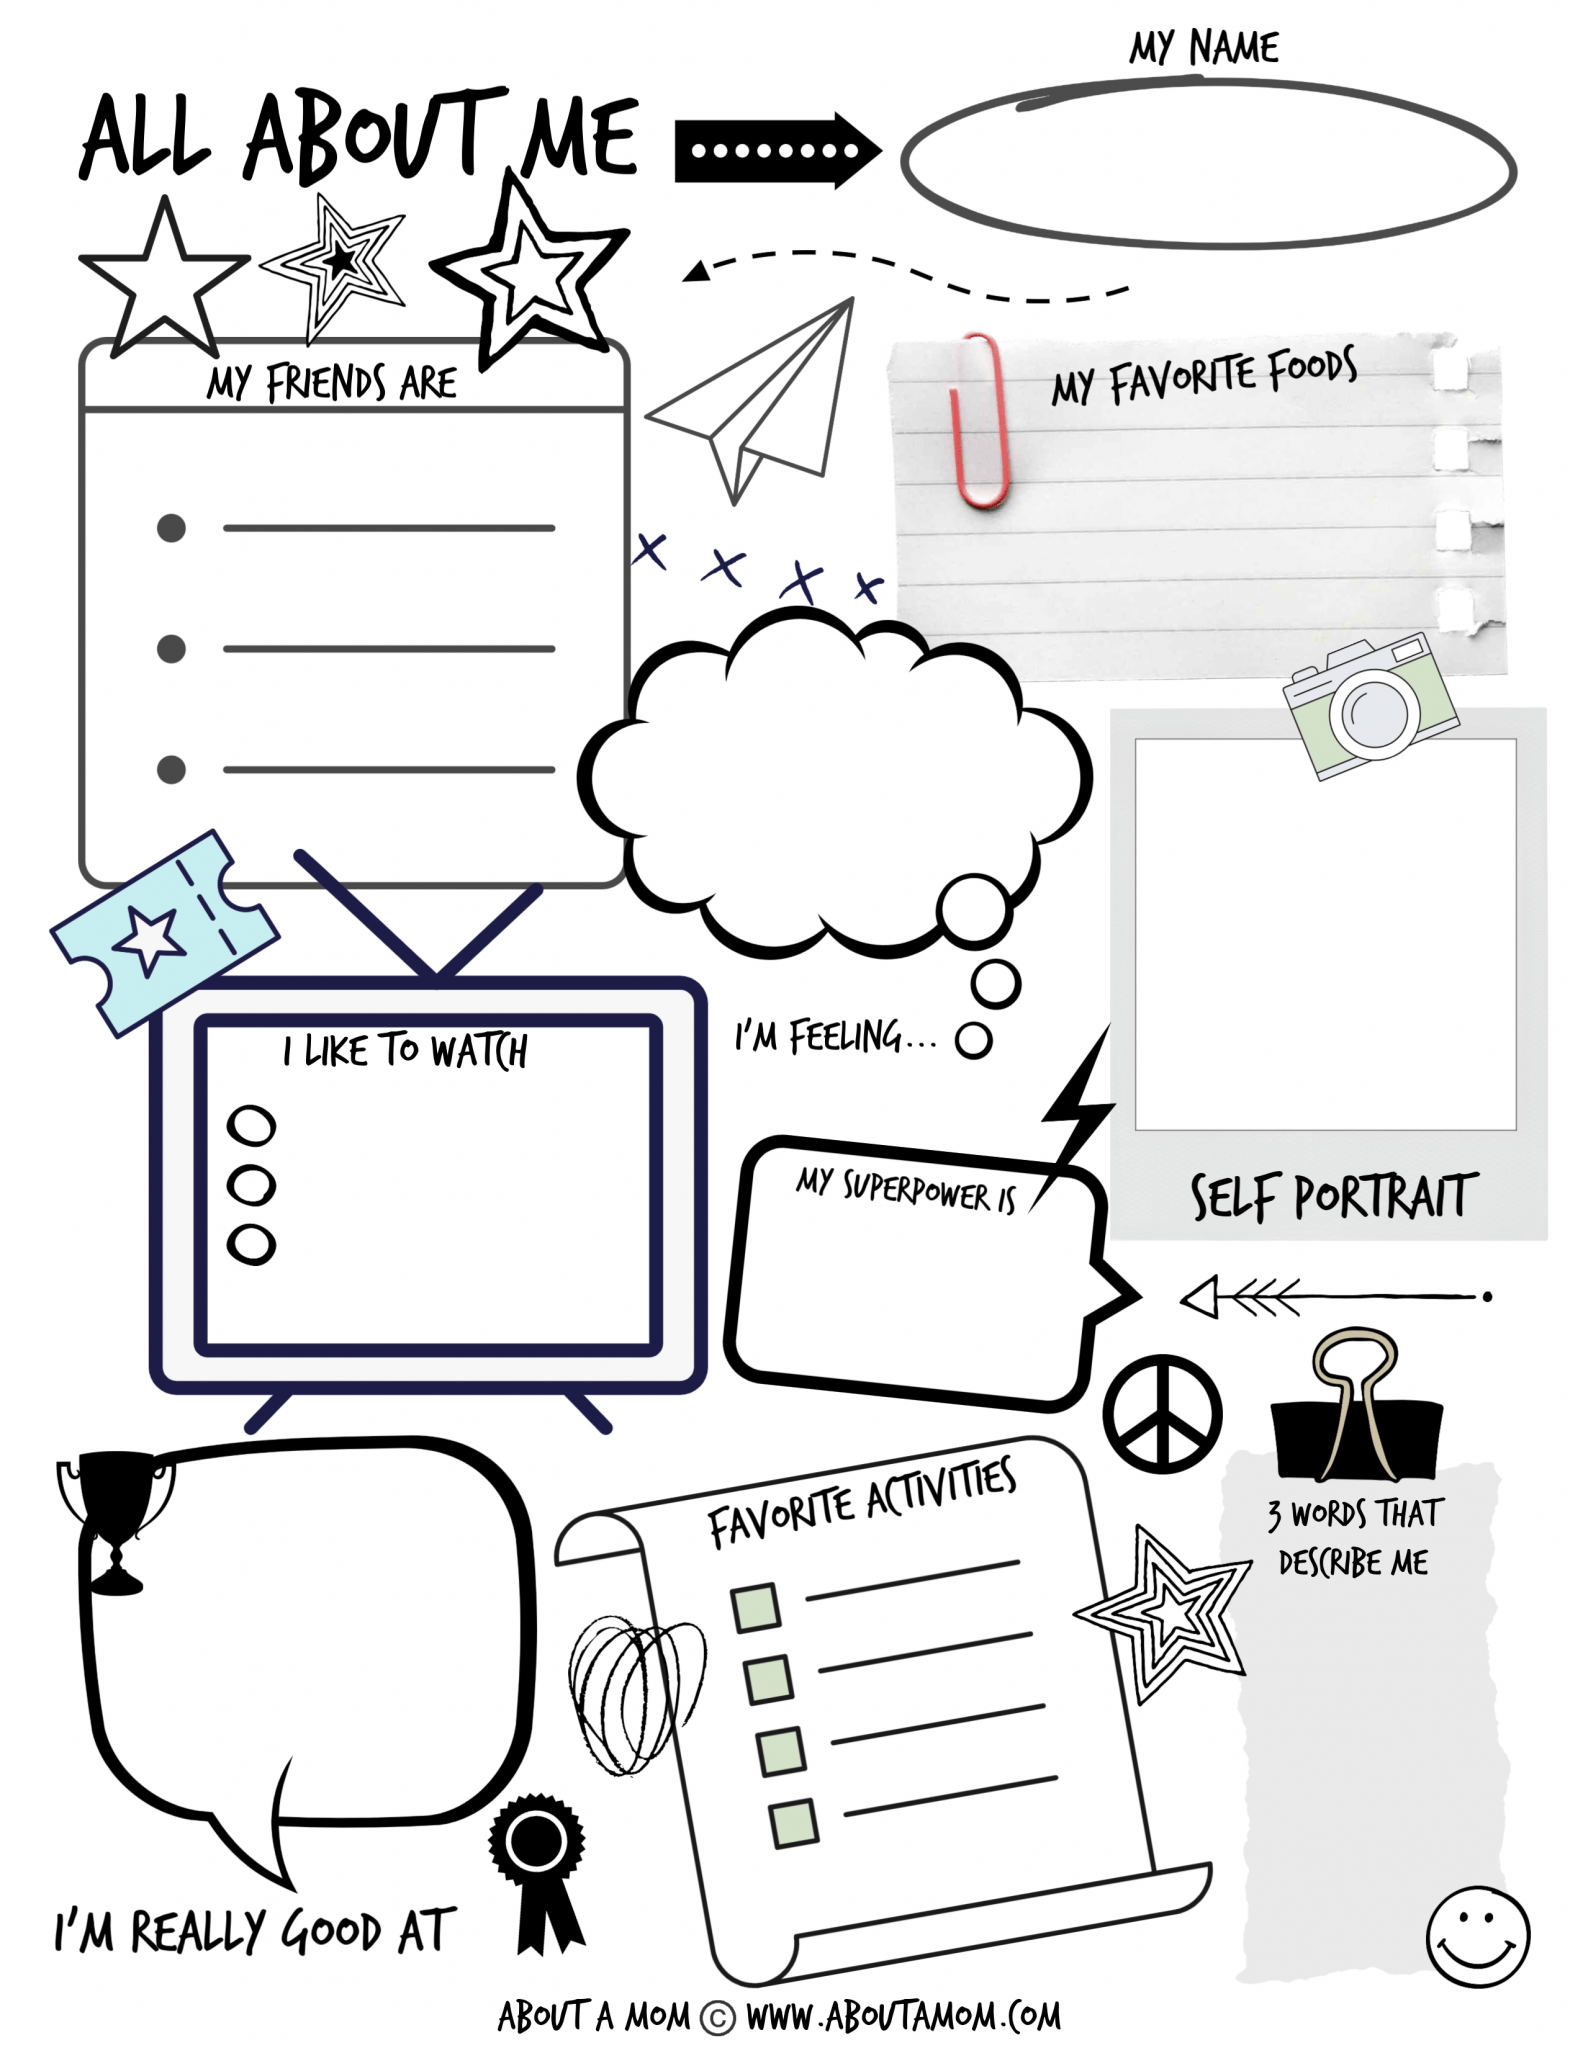 all-about-me-printable-activity-page-for-kids-about-a-mom